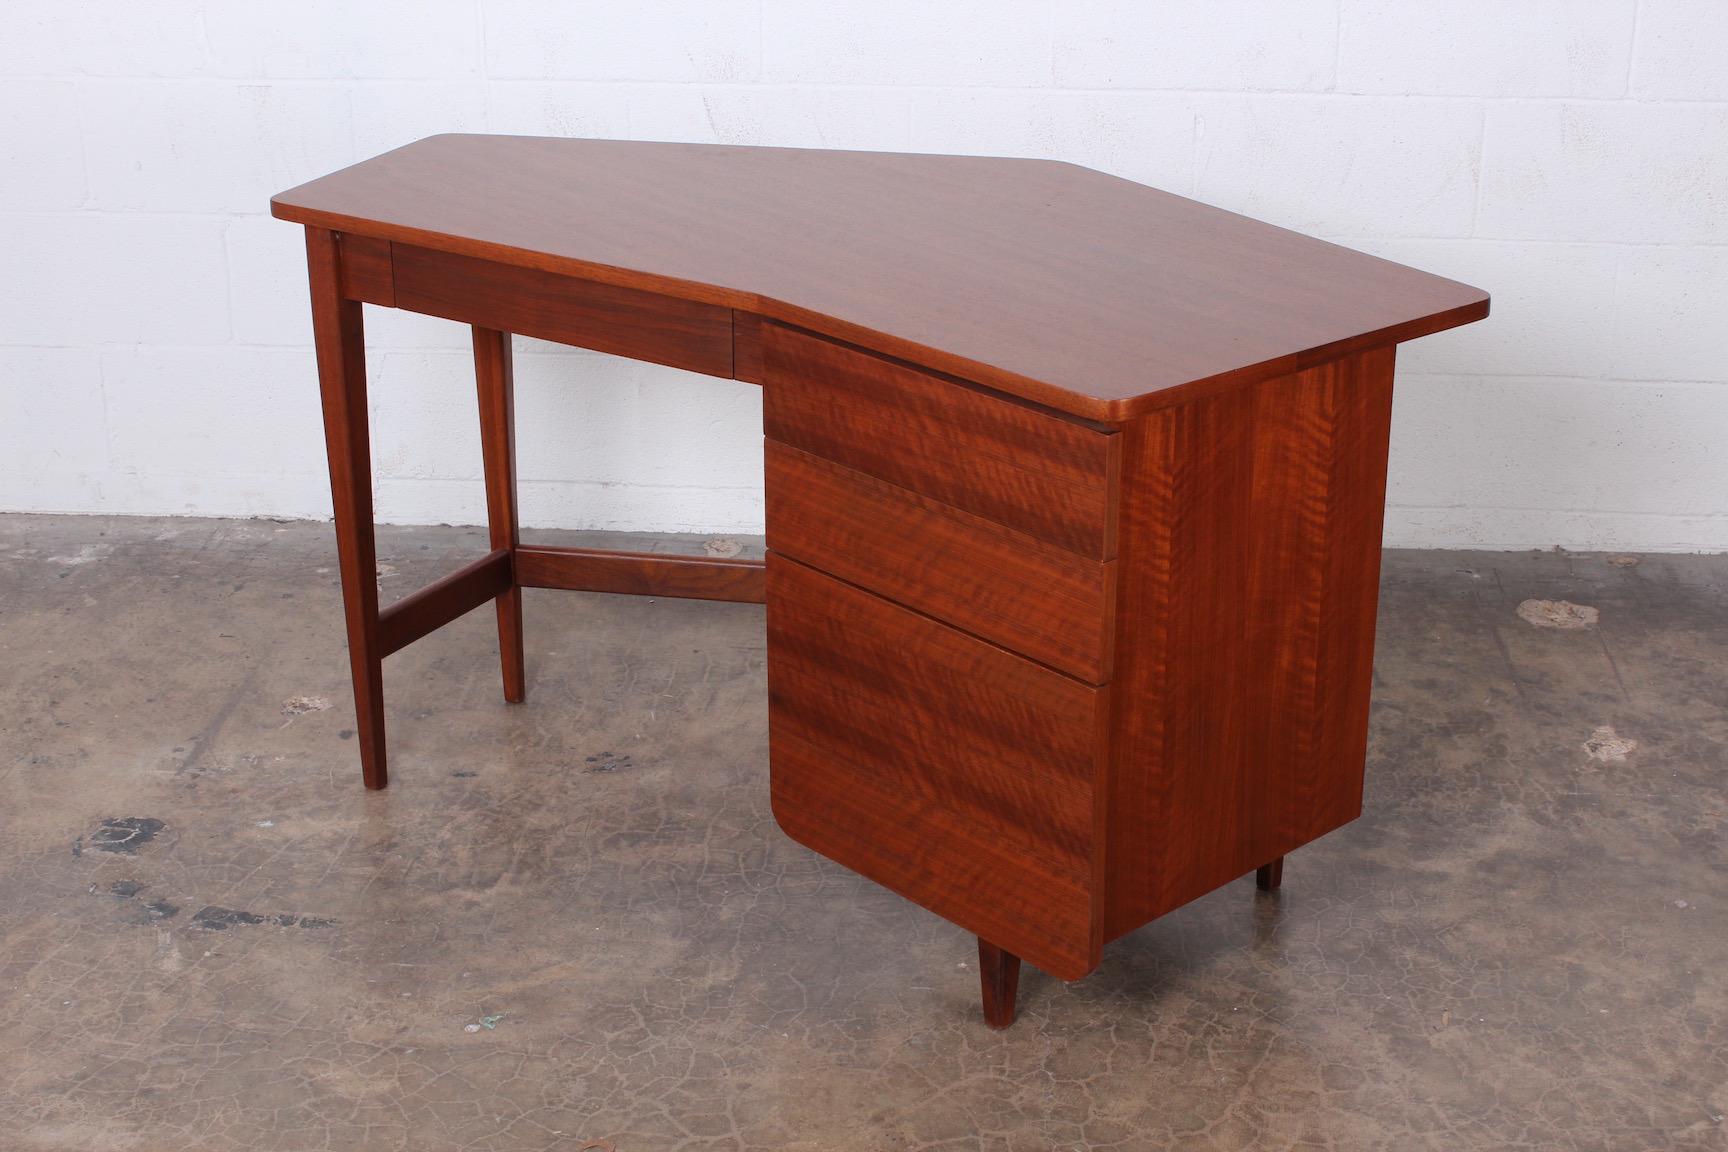 Mid-20th Century Desk by Bertha Schaefer for Singer and Sons